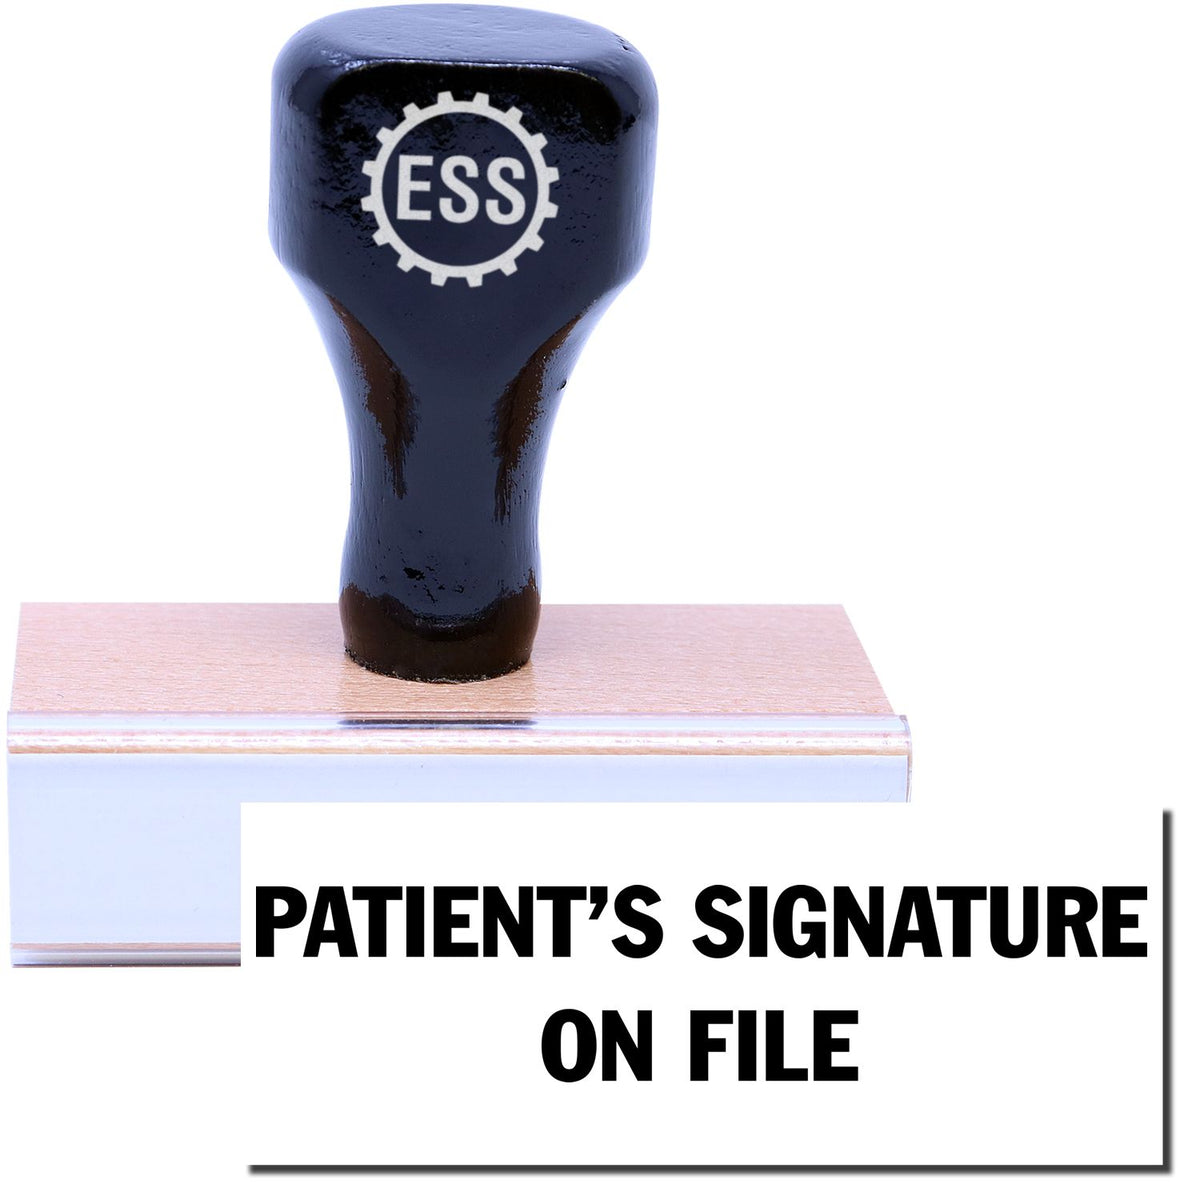 A stock office rubber stamp with a stamped image showing how the text &quot;PATIENT&#39;S SIGNATURE ON FILE&quot; in a large font is displayed after stamping.